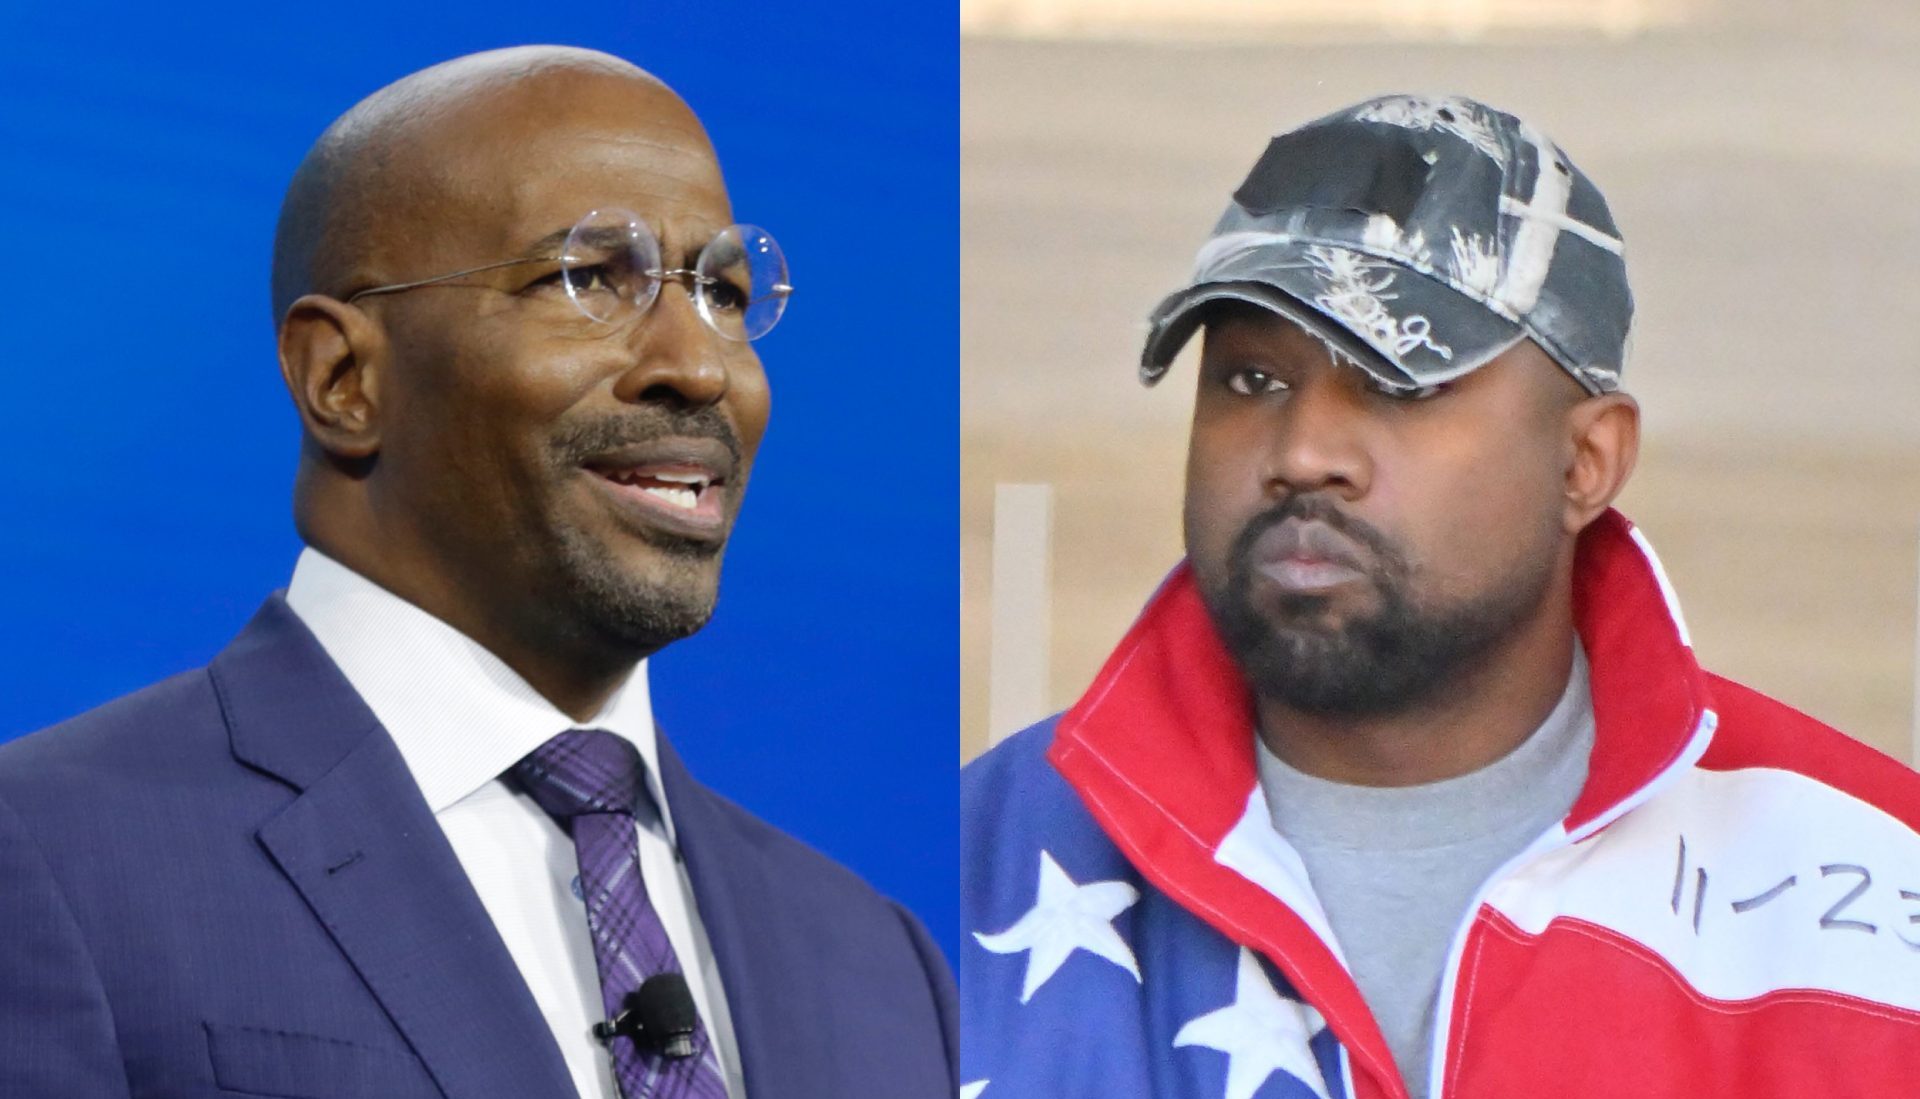 UPDATE: Twitter Slams Van Jones After He Was Misquoted About The Alleged Black ‘Silence’ On Anti-Semitism